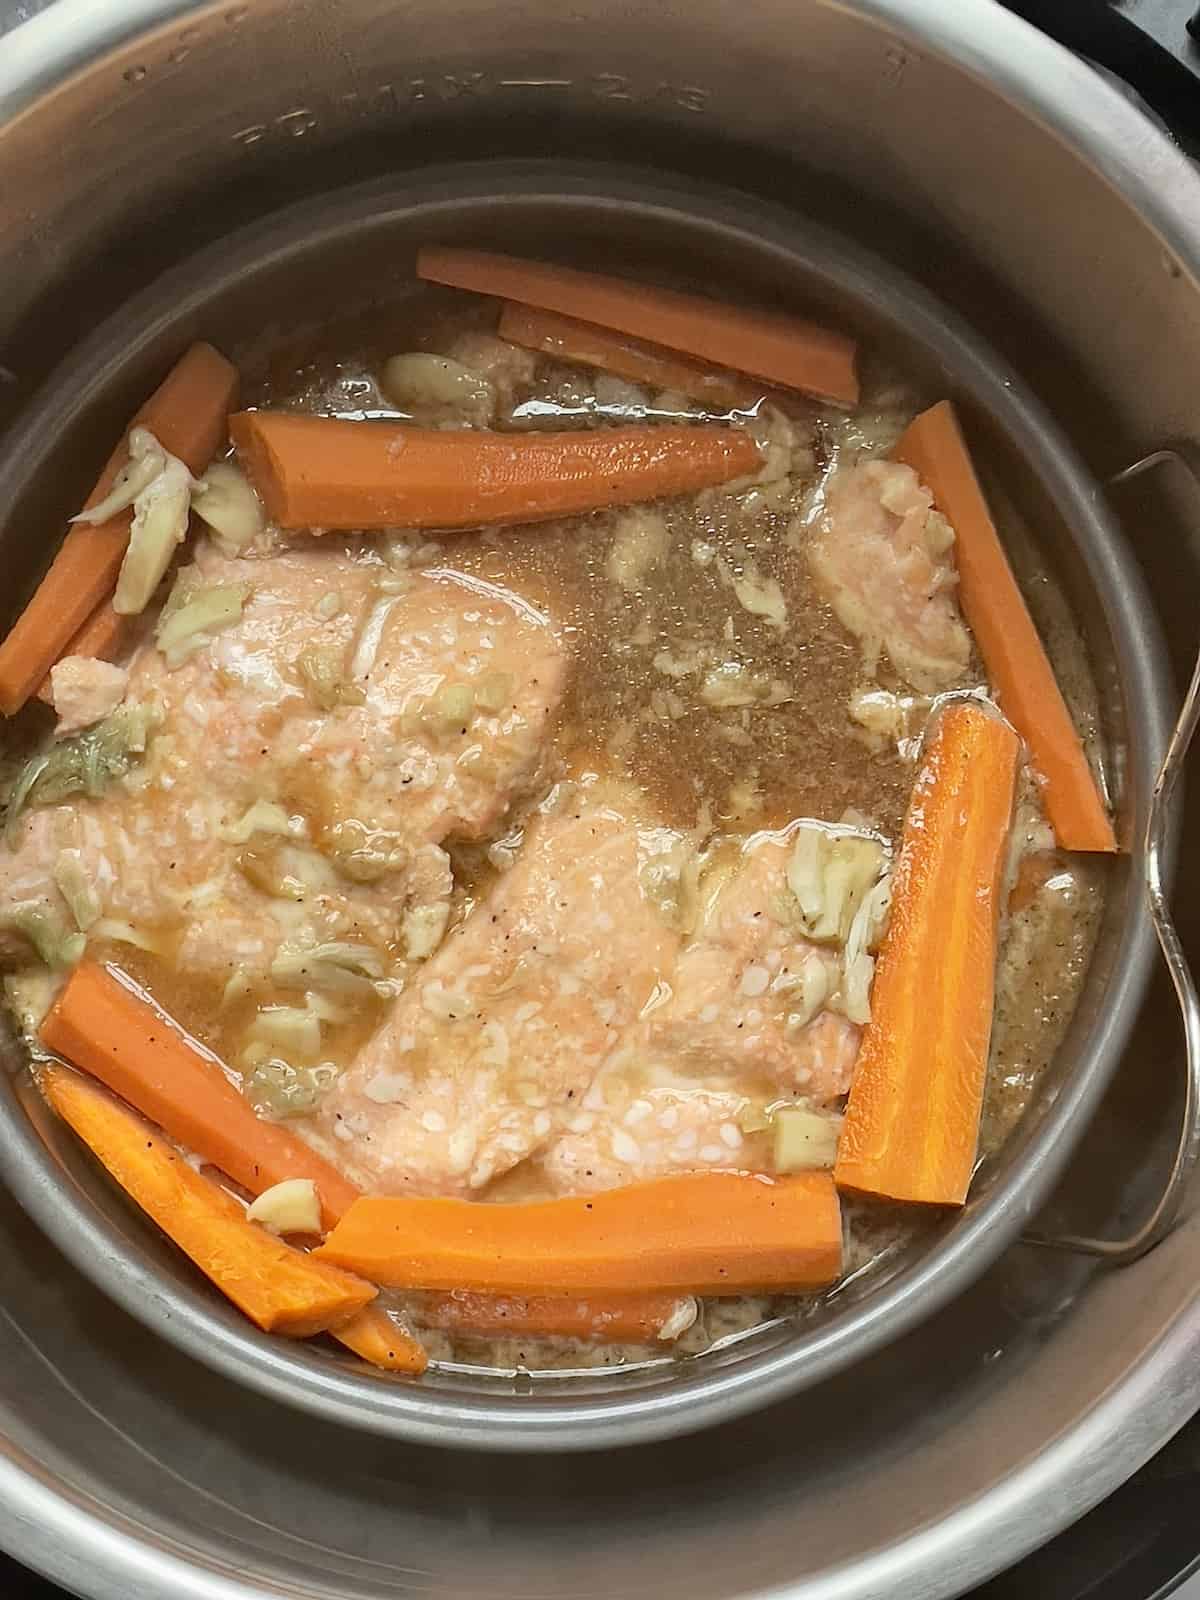 salmon, carrots in a maple glaze cooked in the pressure cooker